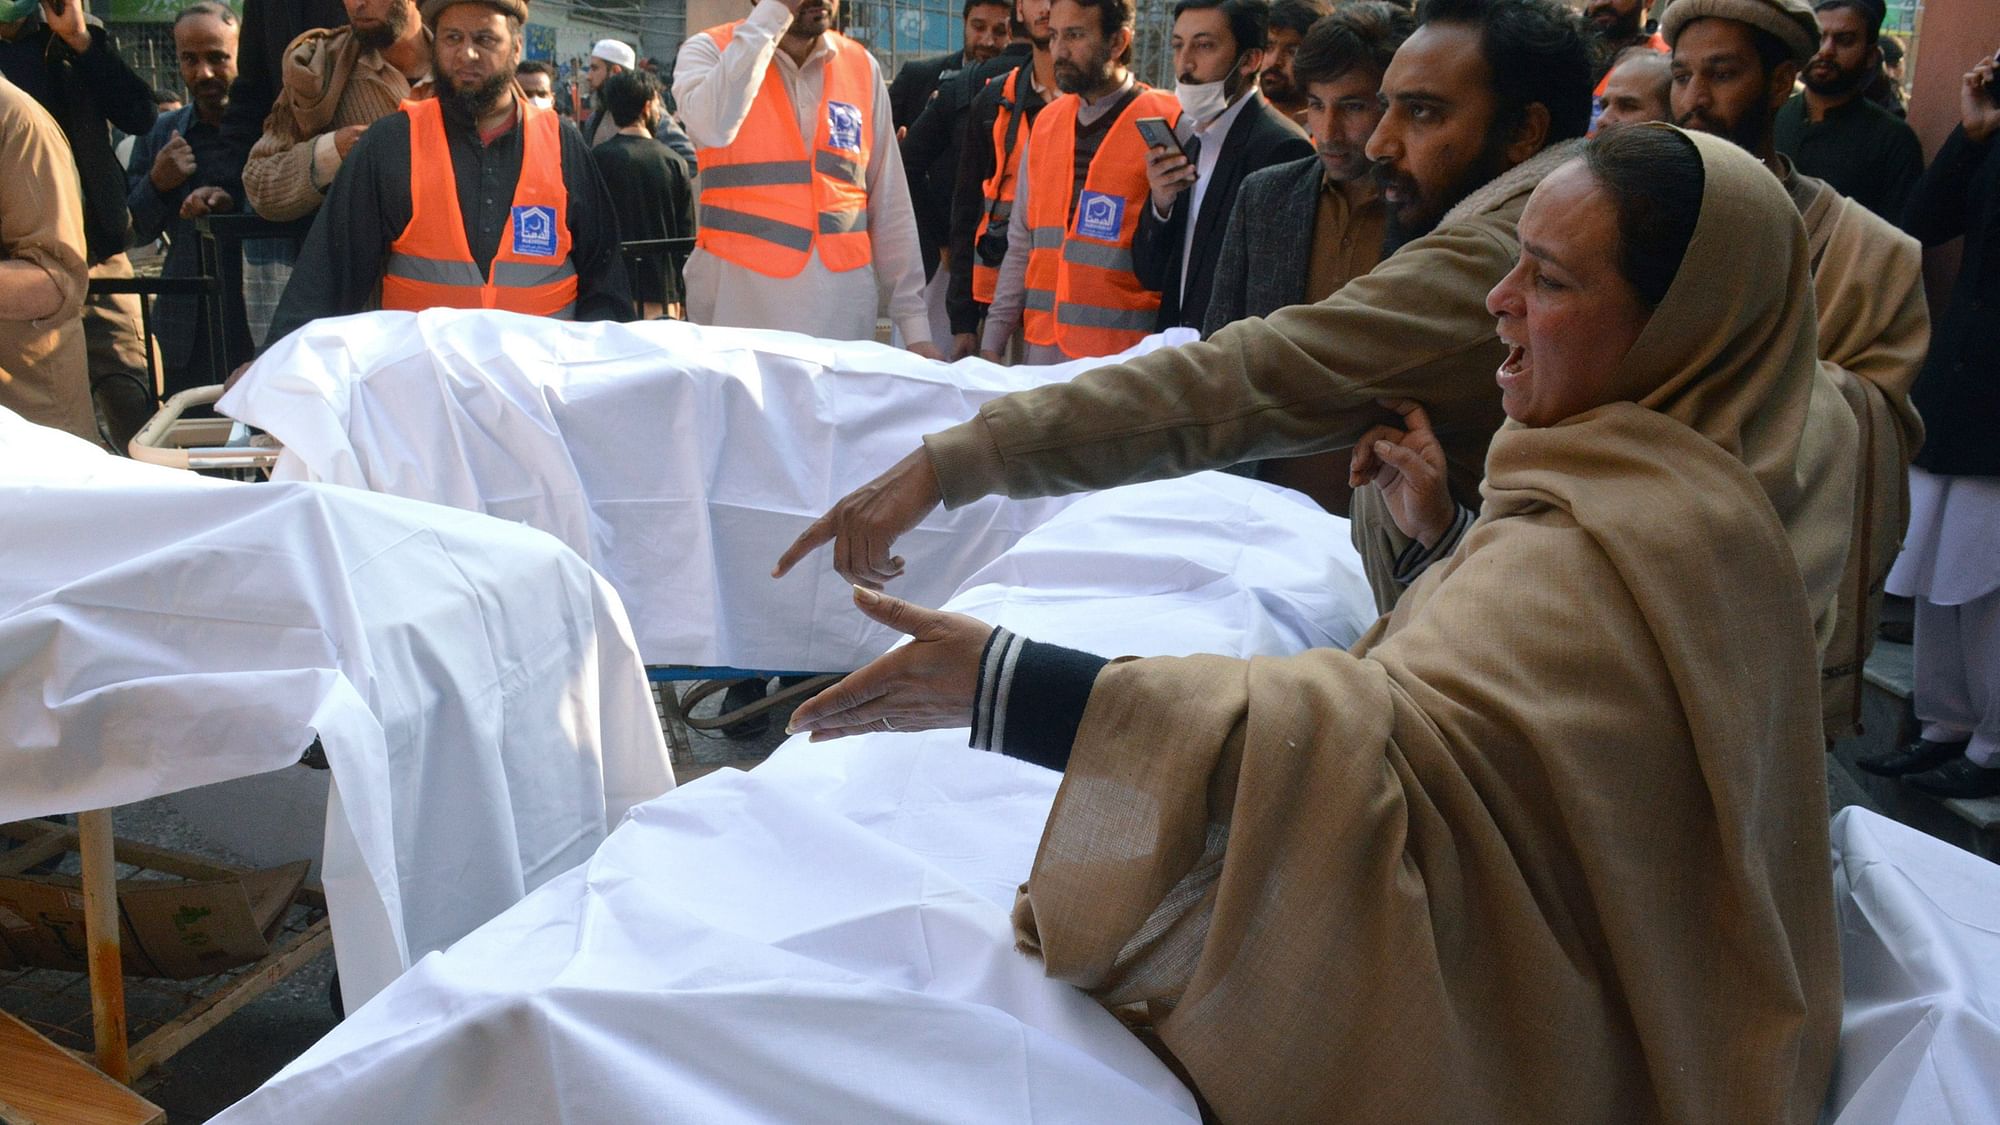 <div class="paragraphs"><p>A powerful bomb went off on Monday, 30 January, near a mosque and police offices in the northwestern Pakistani city of Peshawar, killing multiple people and wounding scores of worshippers, police and government officials said.</p></div>